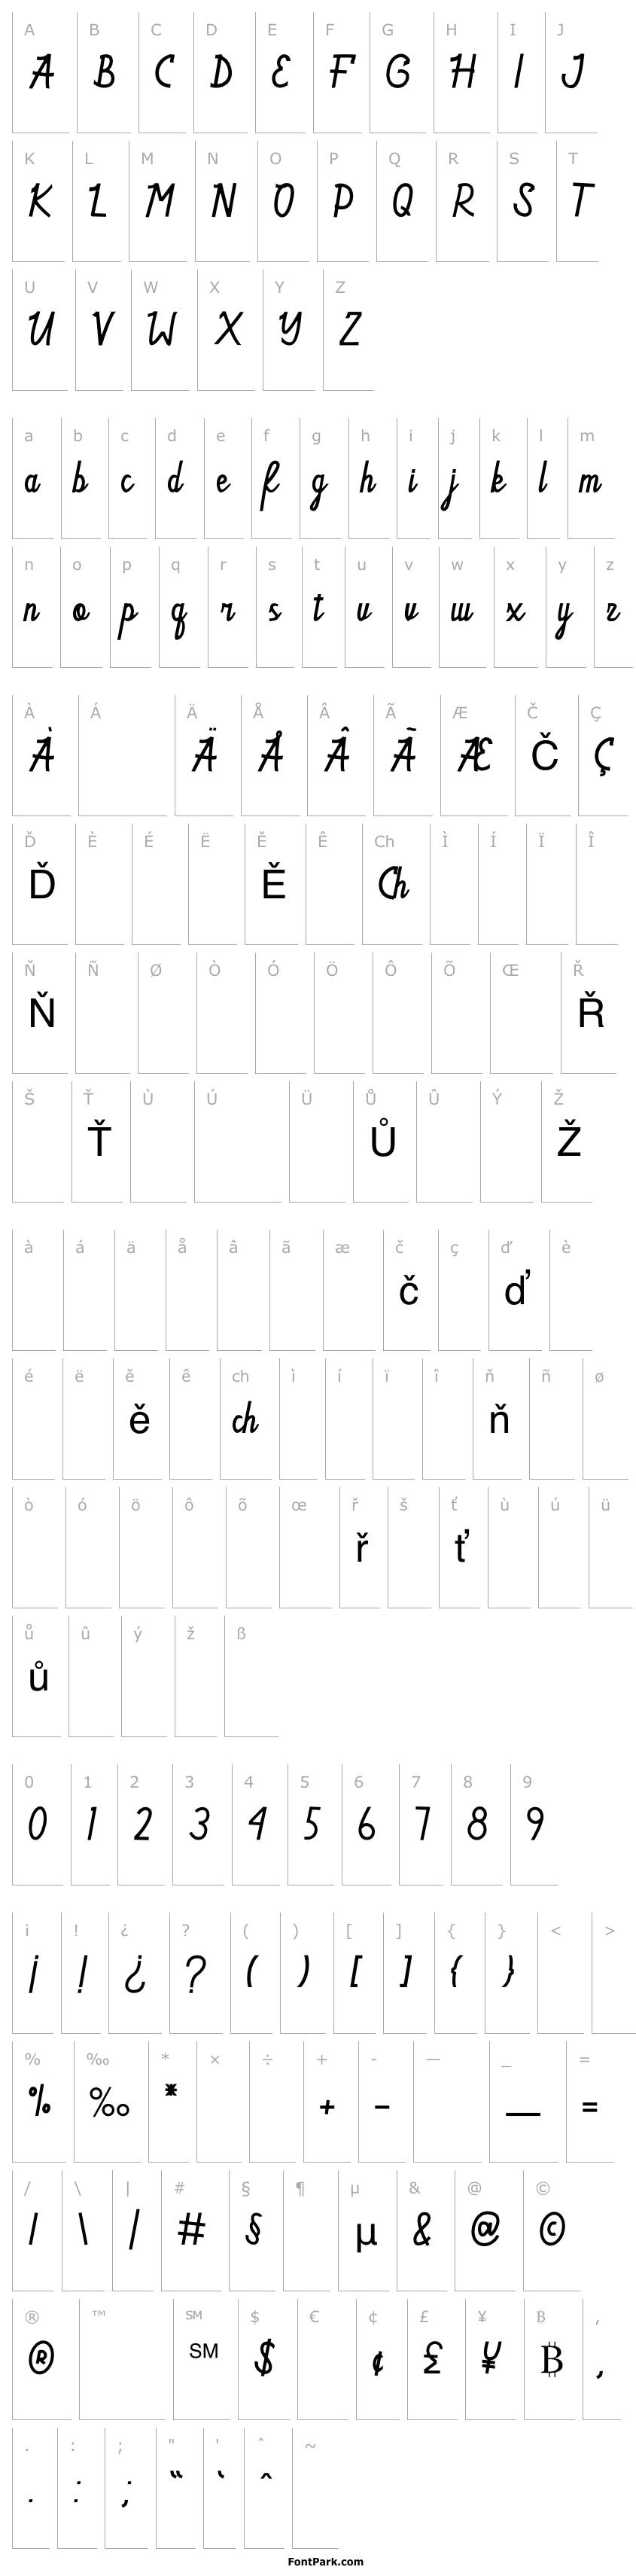 Overview Tamword